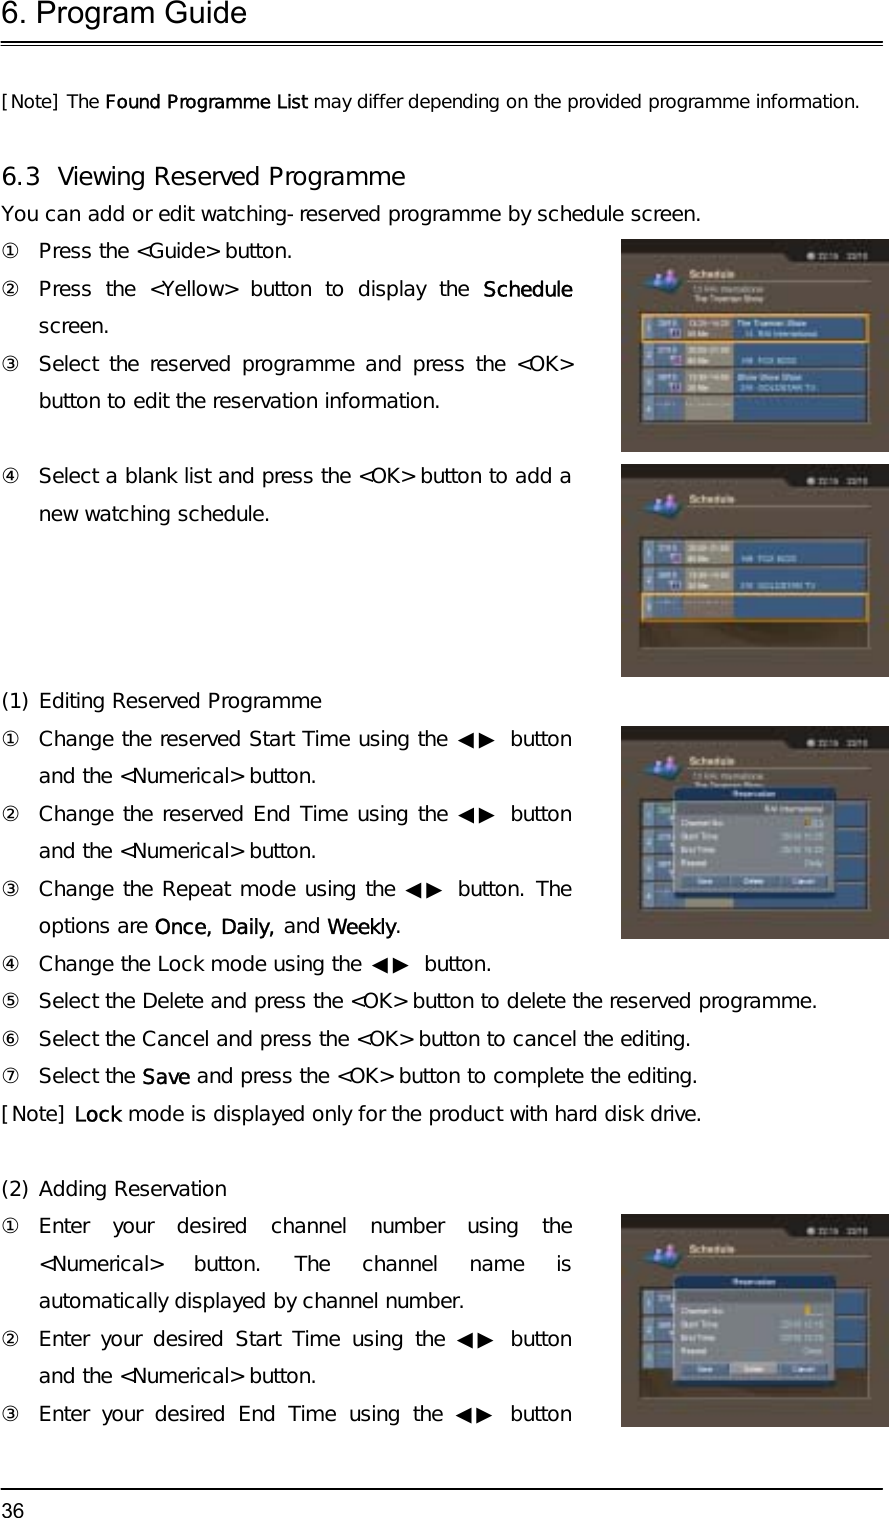 6. Program Guide  36[Note] The Found Programme List may differ depending on the provided programme information.  6.3  Viewing Reserved Programme You can add or edit watching-reserved programme by schedule screen. ①  Press the &lt;Guide&gt; button. ② Press the &lt;Yellow&gt; button to display the Schedule screen. ③  Select the reserved programme and press the &lt;OK&gt; button to edit the reservation information.  ④  Select a blank list and press the &lt;OK&gt; button to add a new watching schedule.  (1) Editing Reserved Programme ①  Change the reserved Start Time using the ◀▶ button and the &lt;Numerical&gt; button.  ②  Change the reserved End Time using the ◀▶ button and the &lt;Numerical&gt; button.  ③  Change the Repeat mode using the ◀▶ button. The options are Once, Daily, and Weekly. ④  Change the Lock mode using the ◀▶ button.  ⑤  Select the Delete and press the &lt;OK&gt; button to delete the reserved programme. ⑥  Select the Cancel and press the &lt;OK&gt; button to cancel the editing. ⑦ Select the Save and press the &lt;OK&gt; button to complete the editing. [Note] Lock mode is displayed only for the product with hard disk drive.  (2) Adding Reservation ① Enter your desired channel number using the &lt;Numerical&gt; button. The channel name is automatically displayed by channel number. ②  Enter your desired Start Time using the ◀▶ button and the &lt;Numerical&gt; button. ③ Enter your desired End Time using the ◀▶ button 